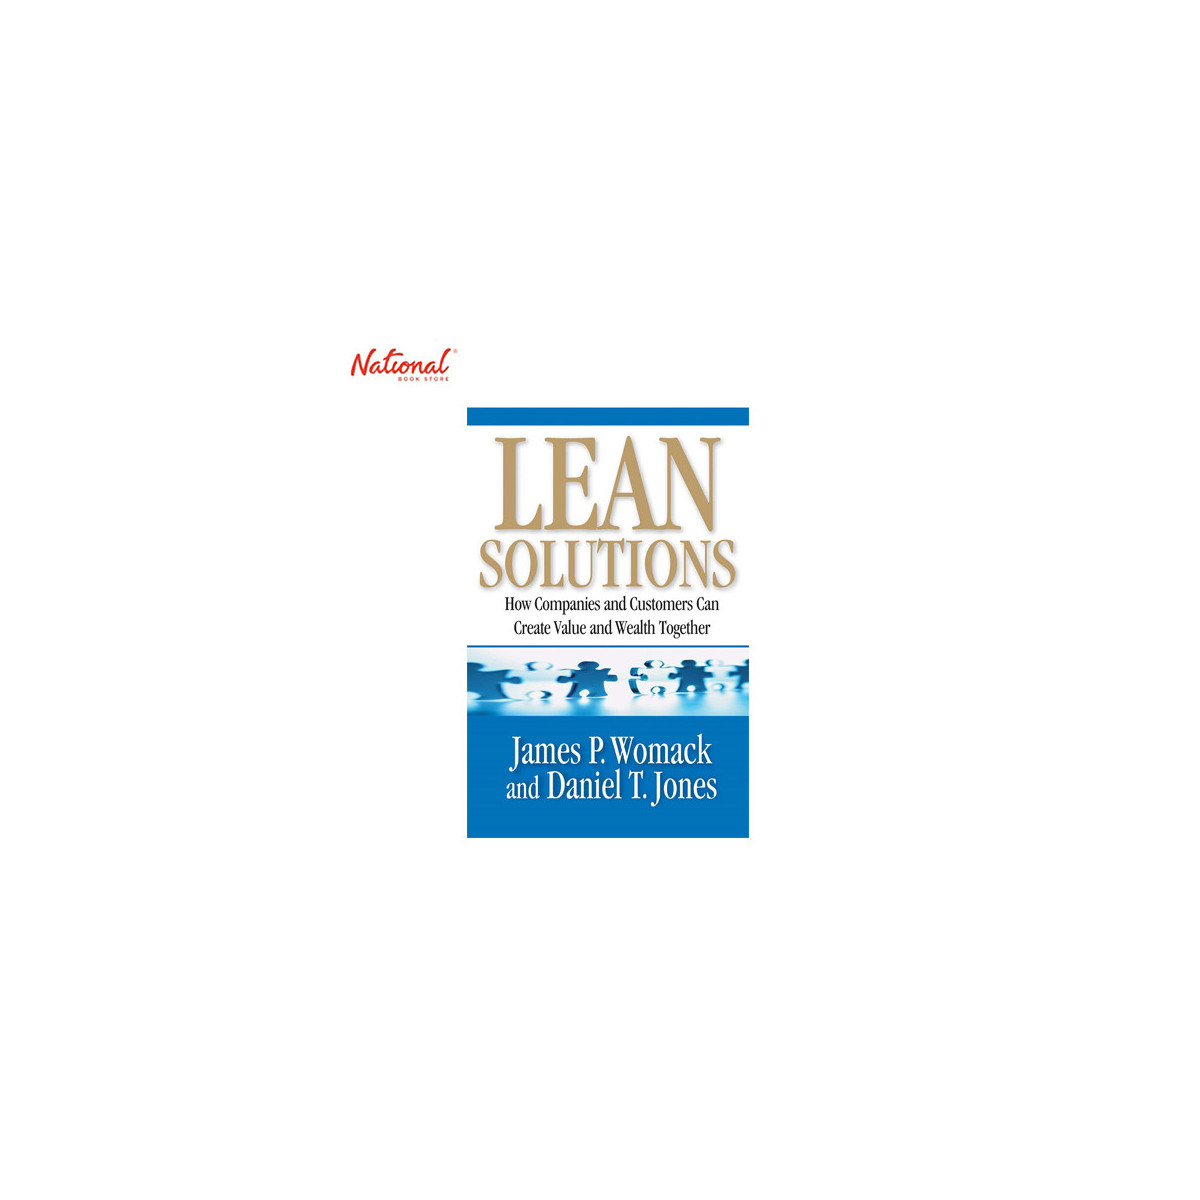 Lean Solutions Trade Paperback by James P. Womack and Daniel T. Jones